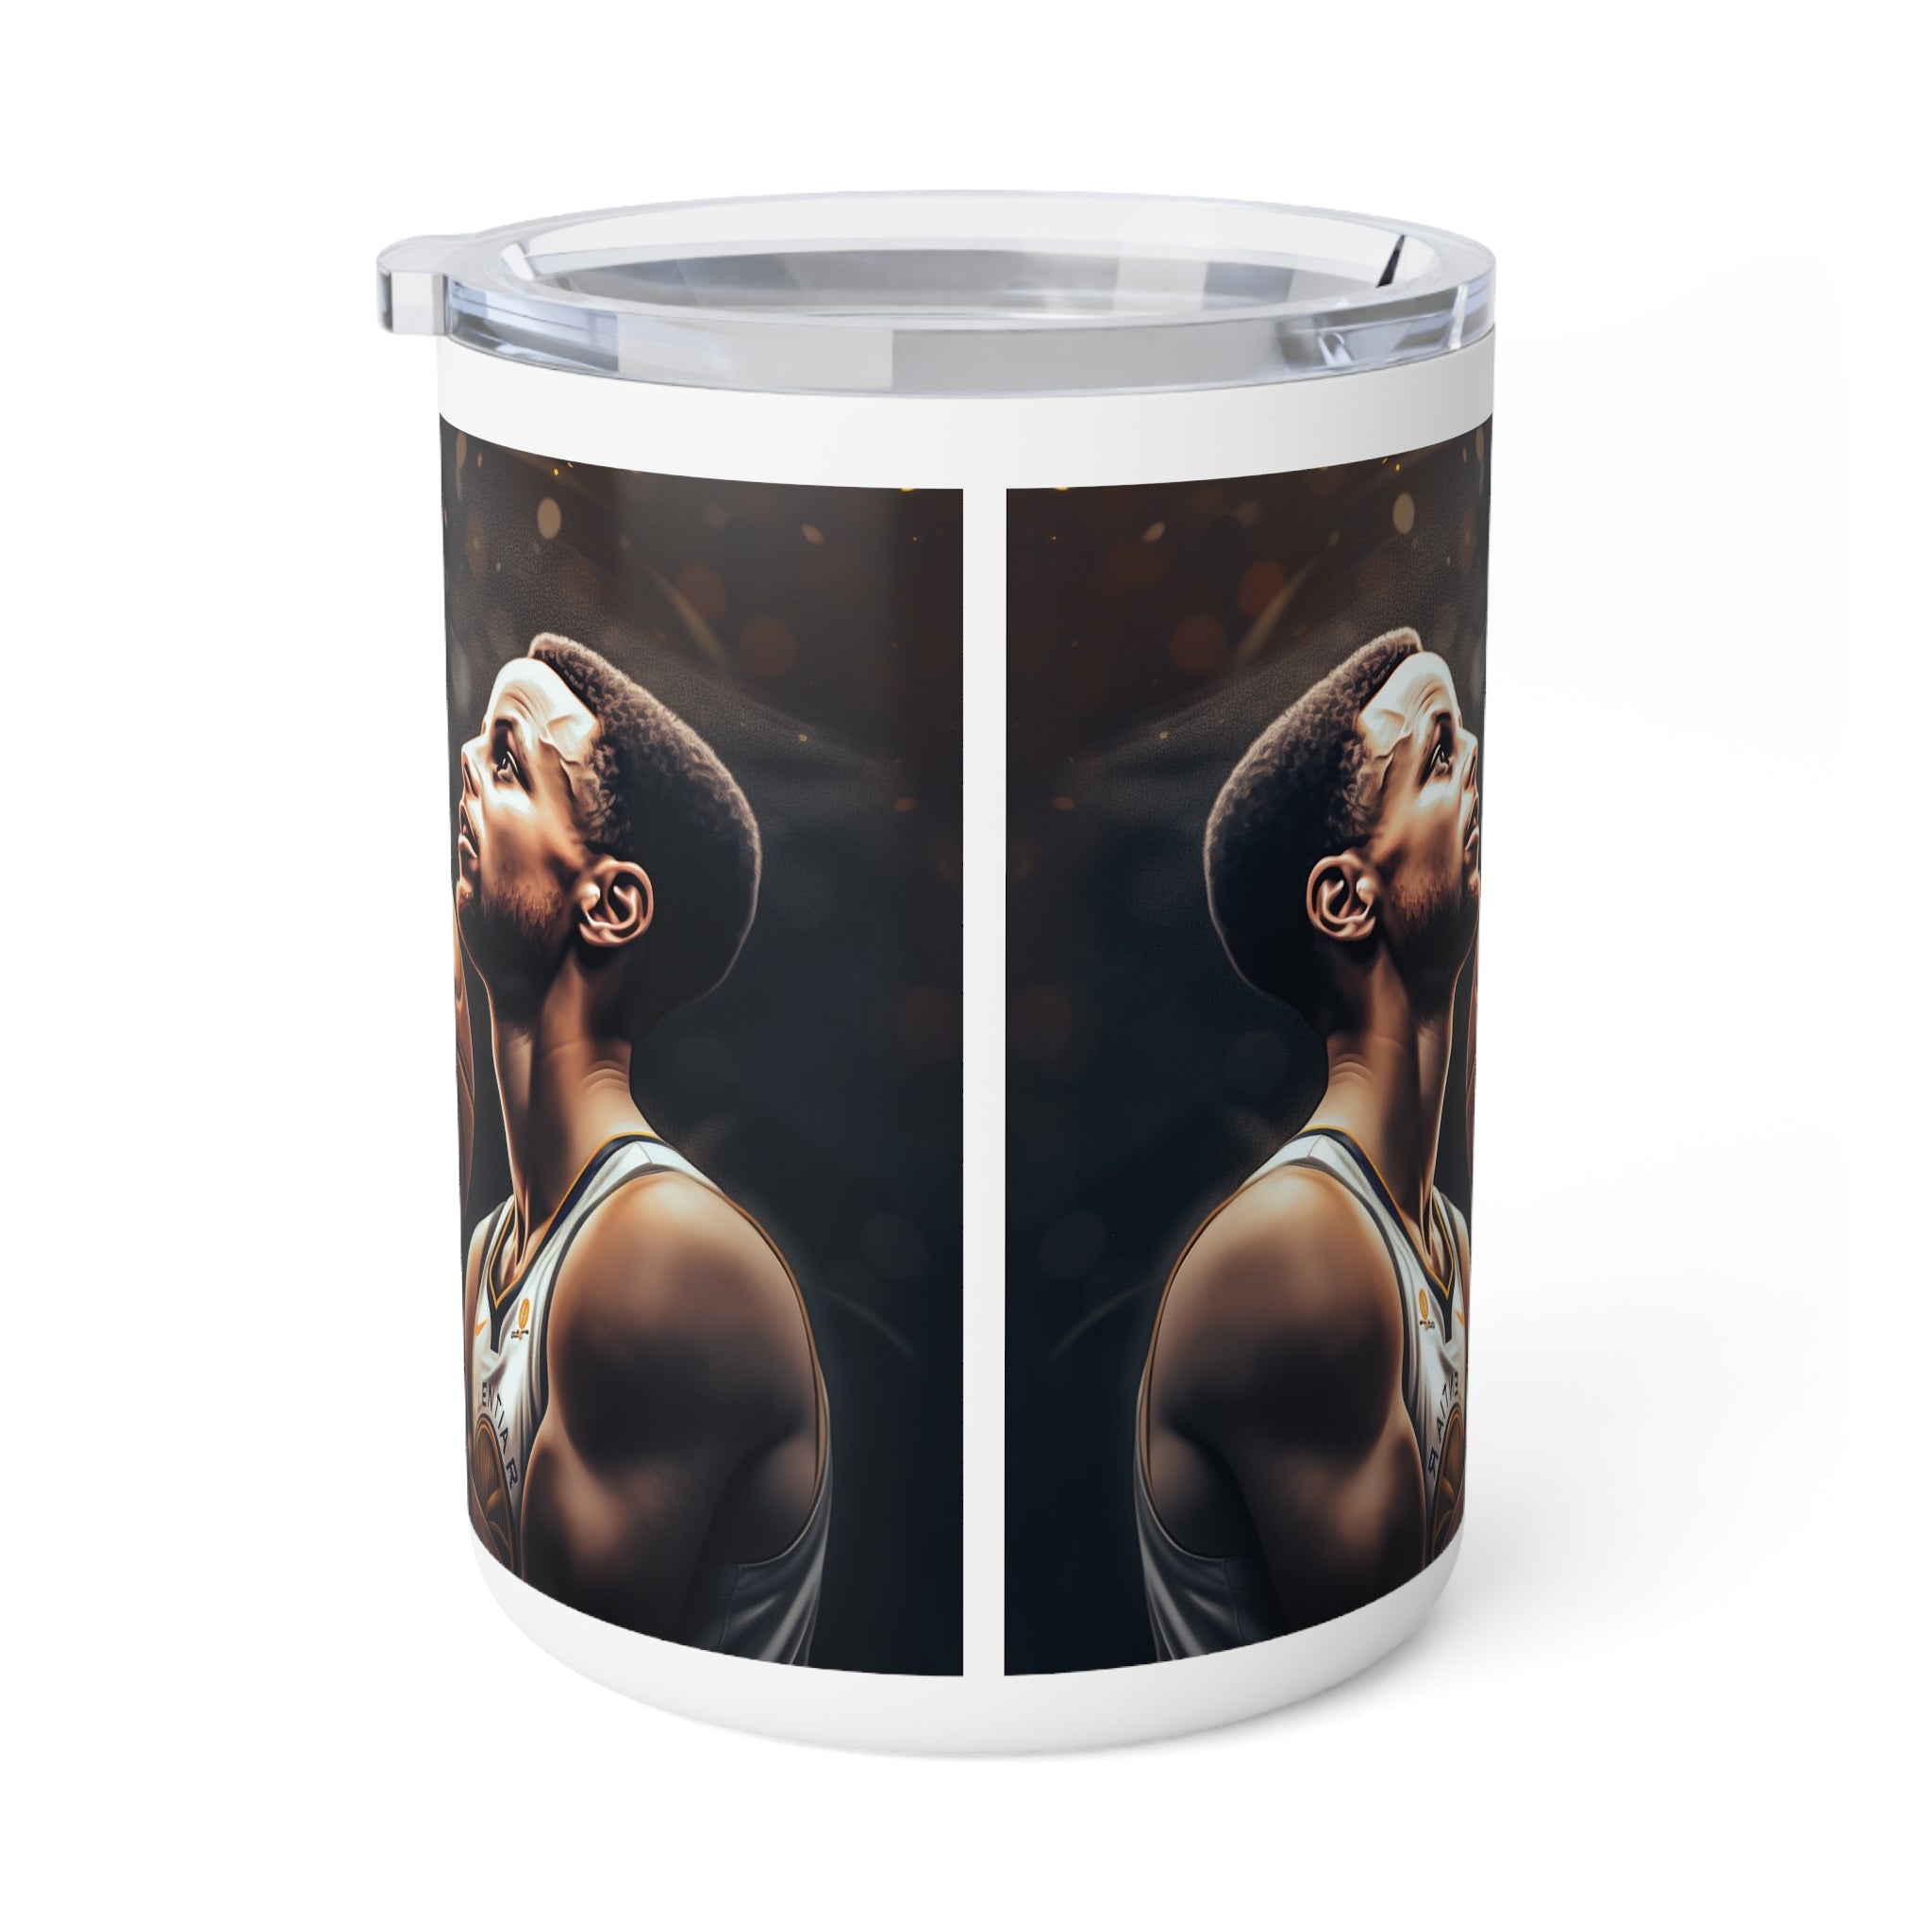 Great Conversation Starter at Office Gatherings or Group Meetings! Professional Basketball Player Insulated Coffee Mug, 10oz - For True Basketball Heroes!